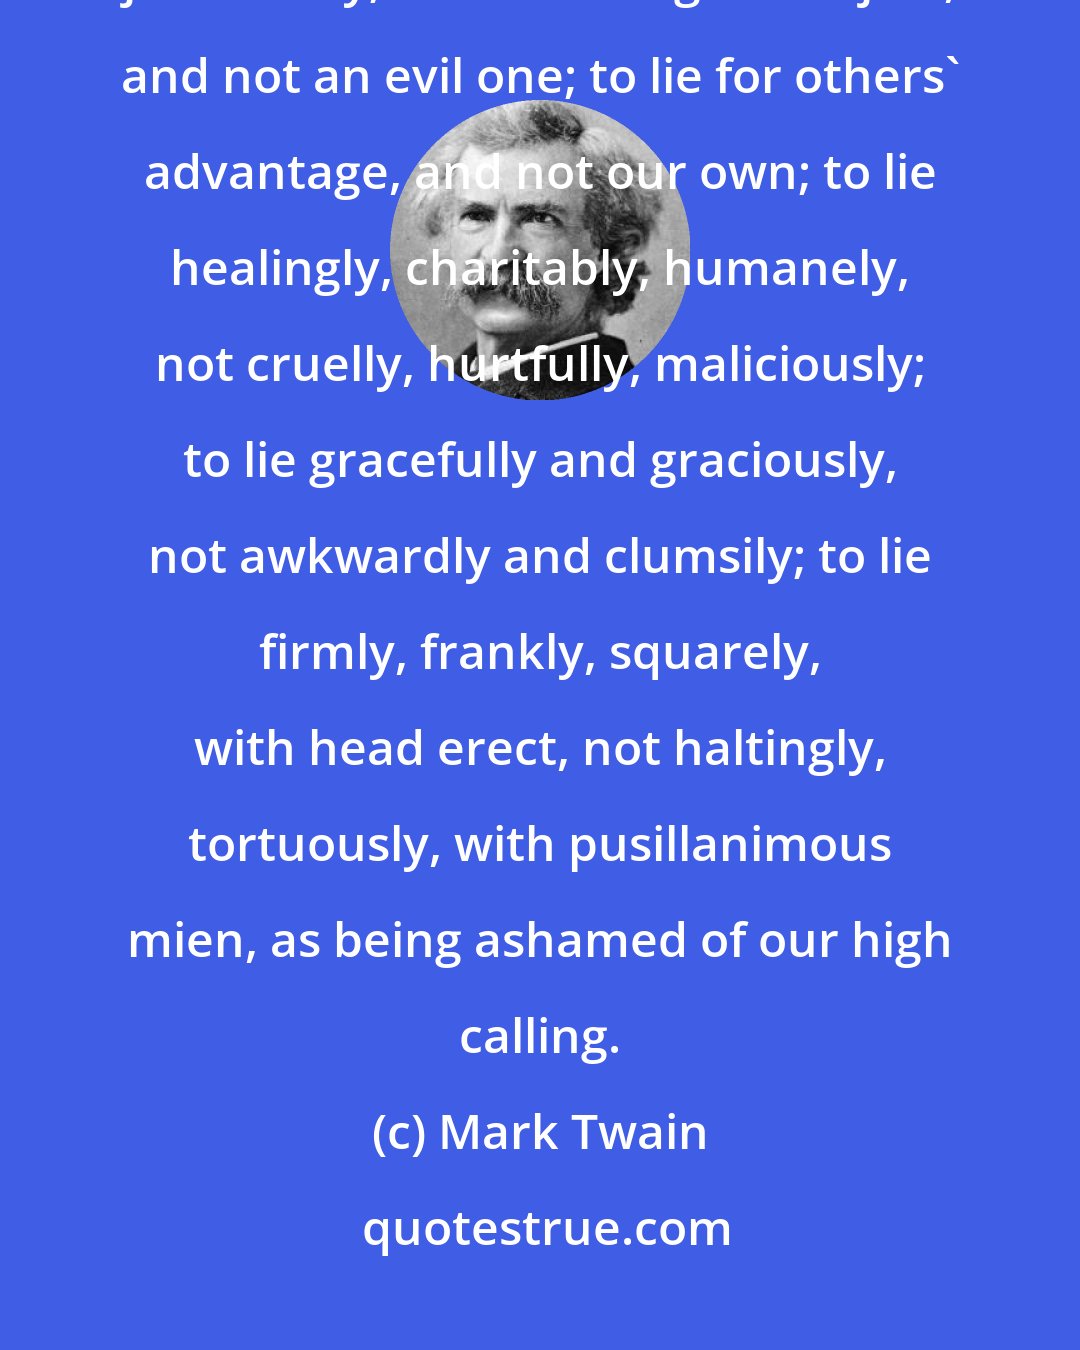 Mark Twain: The wise thing is for us diligently to train ourselves to lie thoughtfully, judiciously; to lie with a good object, and not an evil one; to lie for others' advantage, and not our own; to lie healingly, charitably, humanely, not cruelly, hurtfully, maliciously; to lie gracefully and graciously, not awkwardly and clumsily; to lie firmly, frankly, squarely, with head erect, not haltingly, tortuously, with pusillanimous mien, as being ashamed of our high calling.